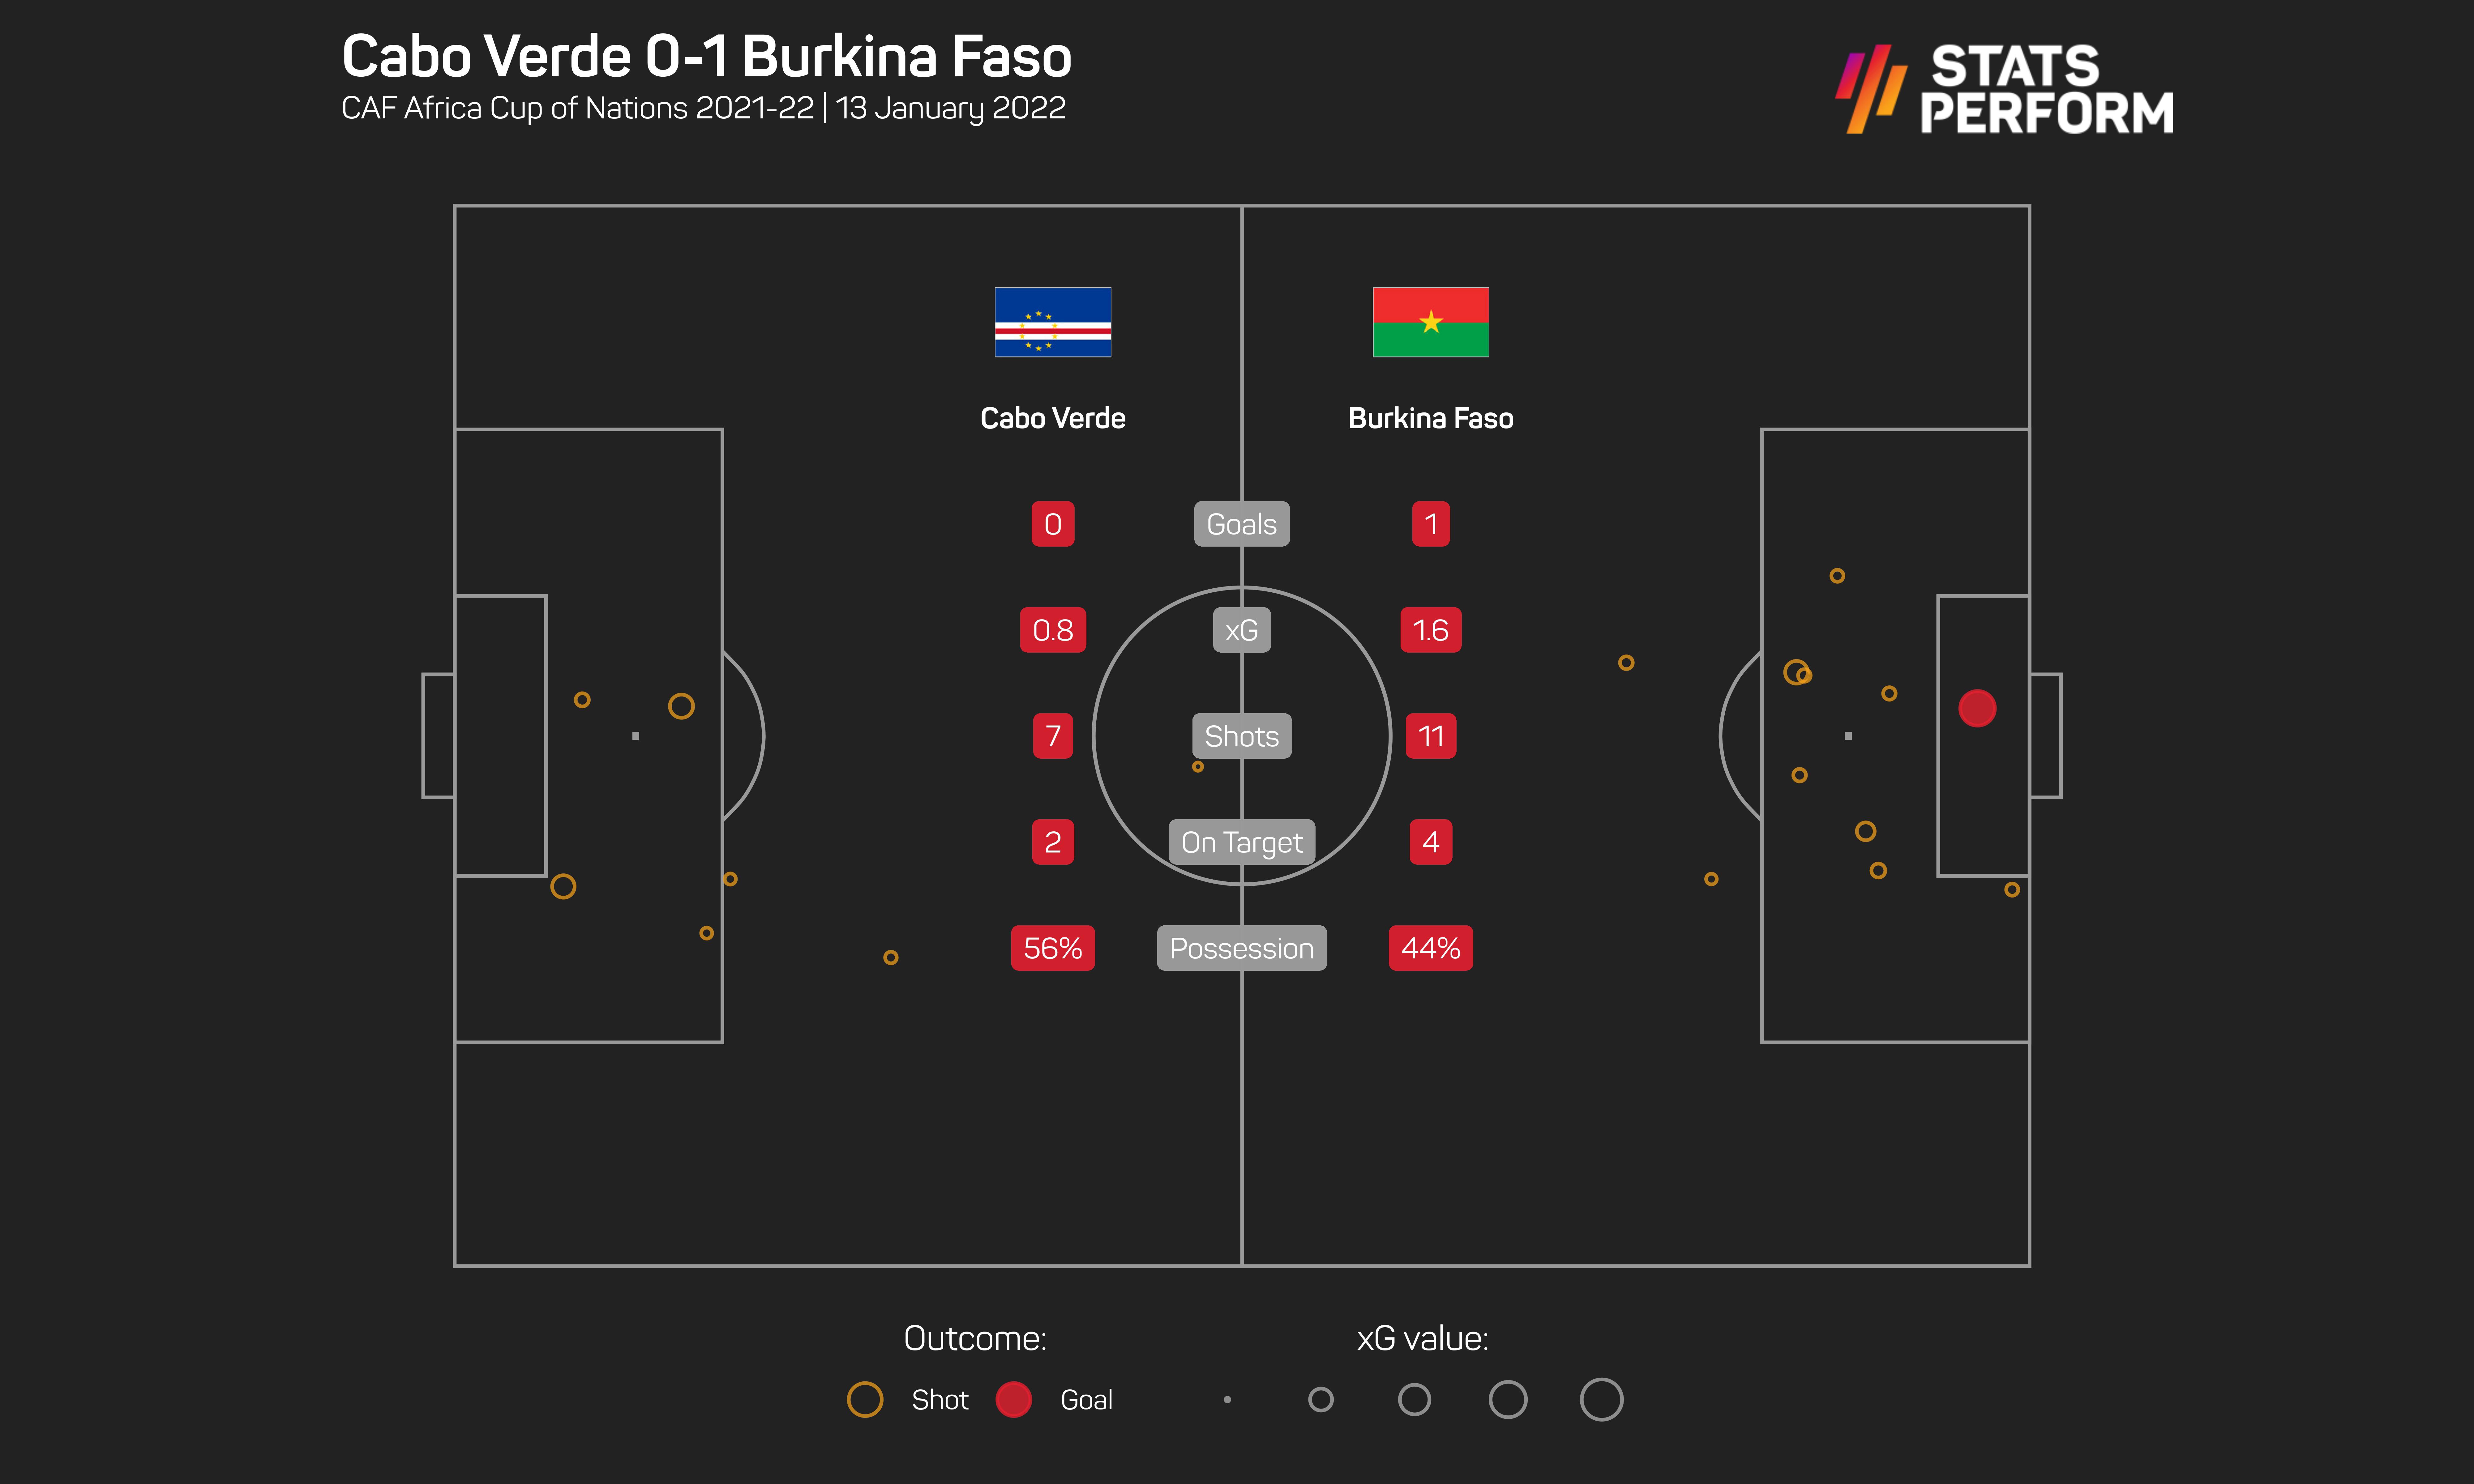 Burkina Faso claimed their first win of the 2021 AFCON